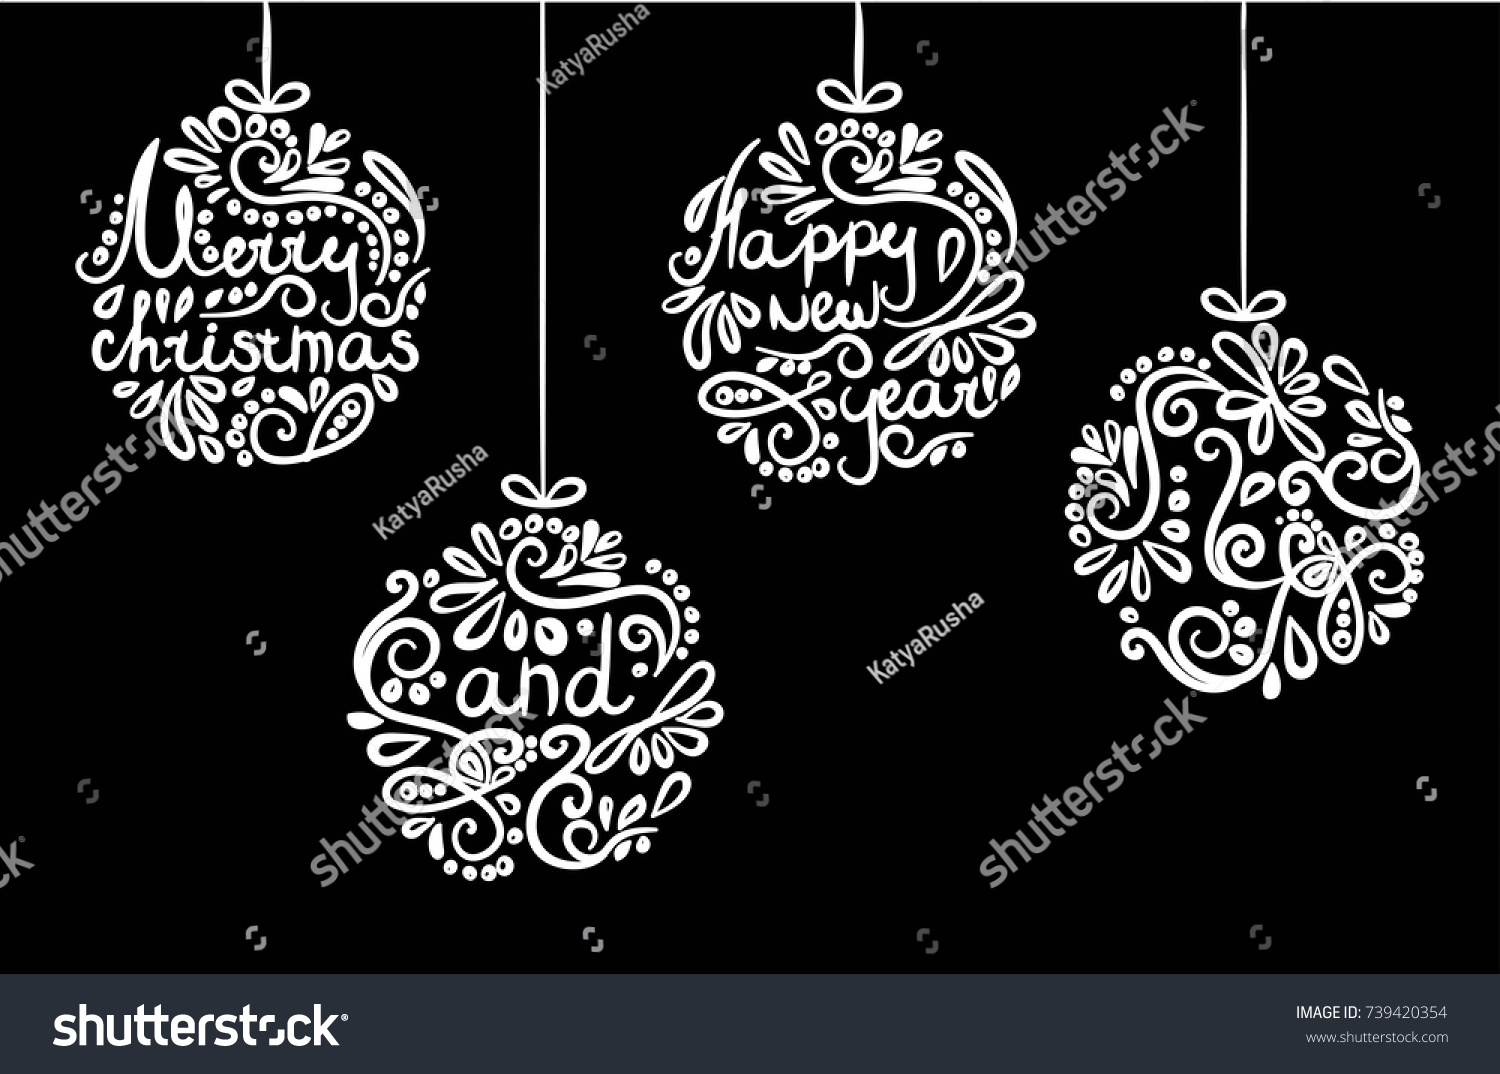 New Year and Christmas 2018 on the balls Vector illustration